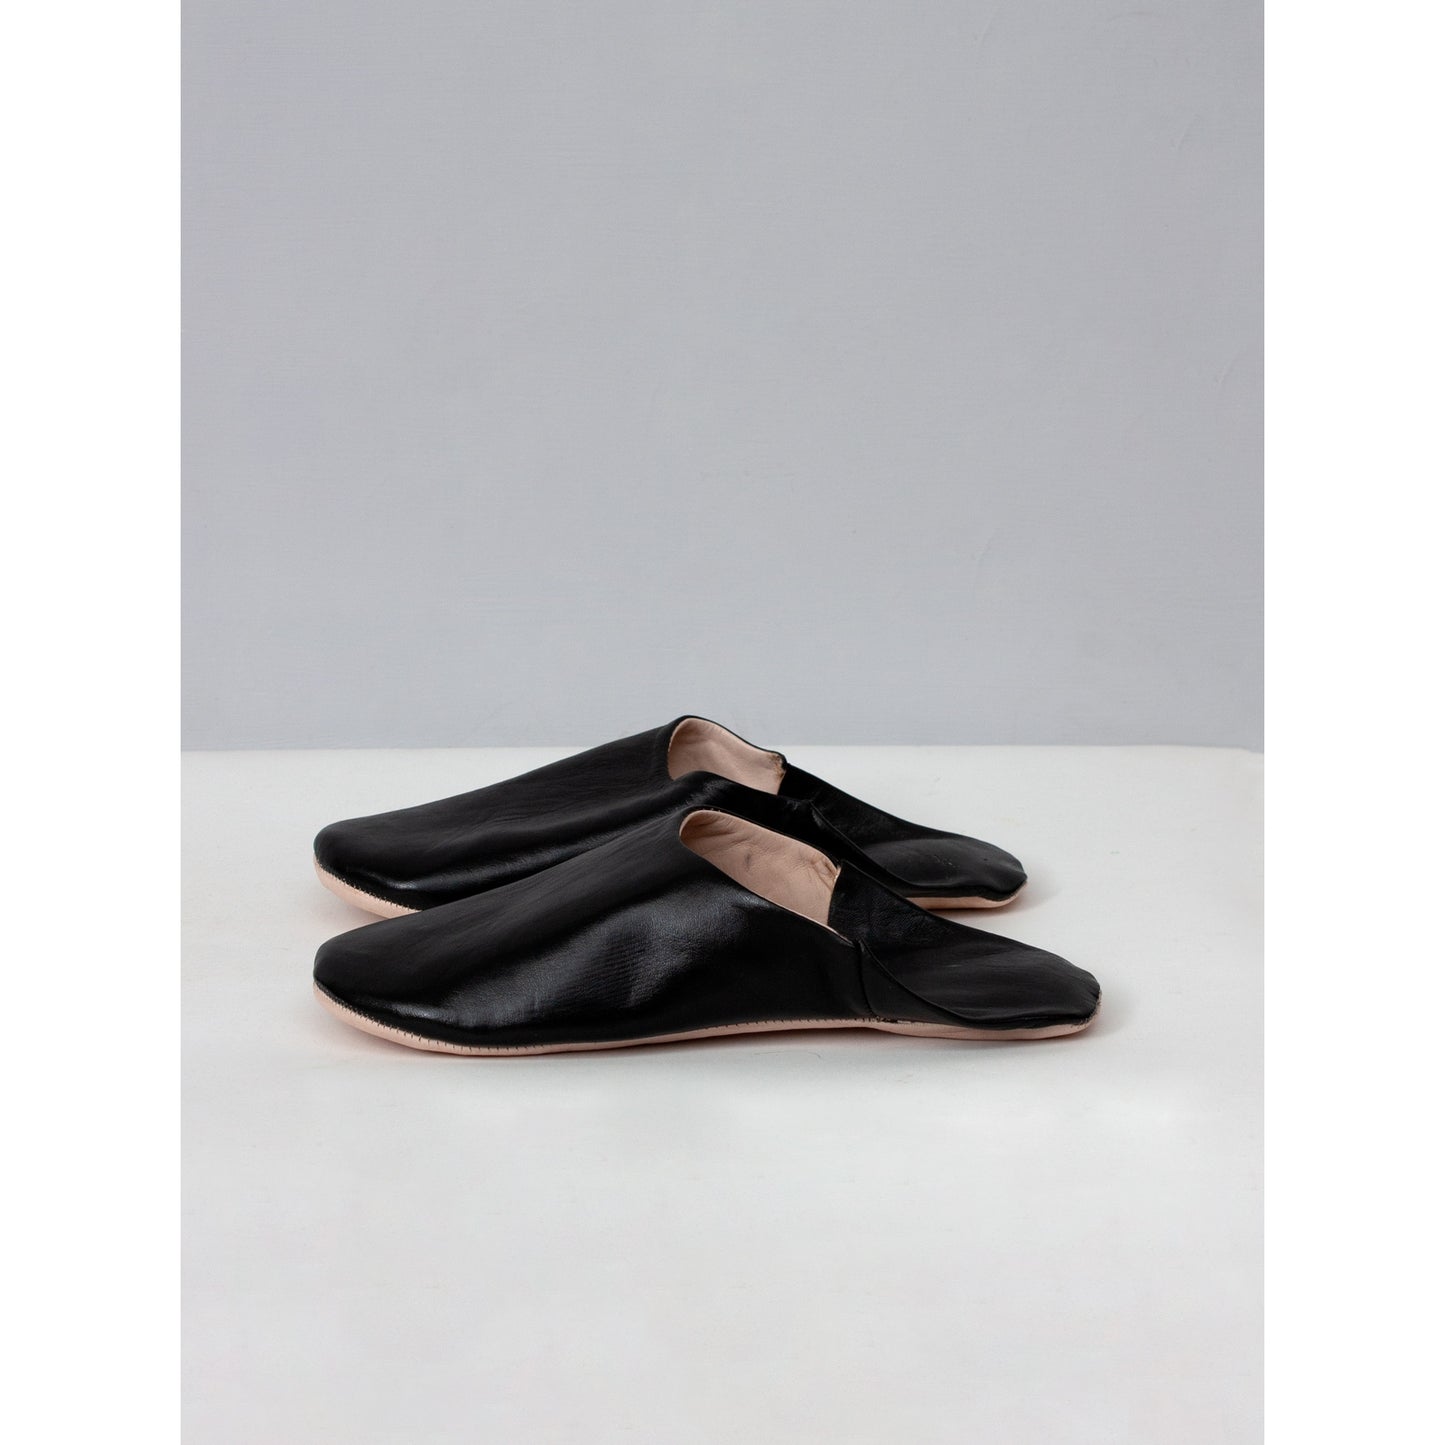 Moroccan Babouche Slippers, Black